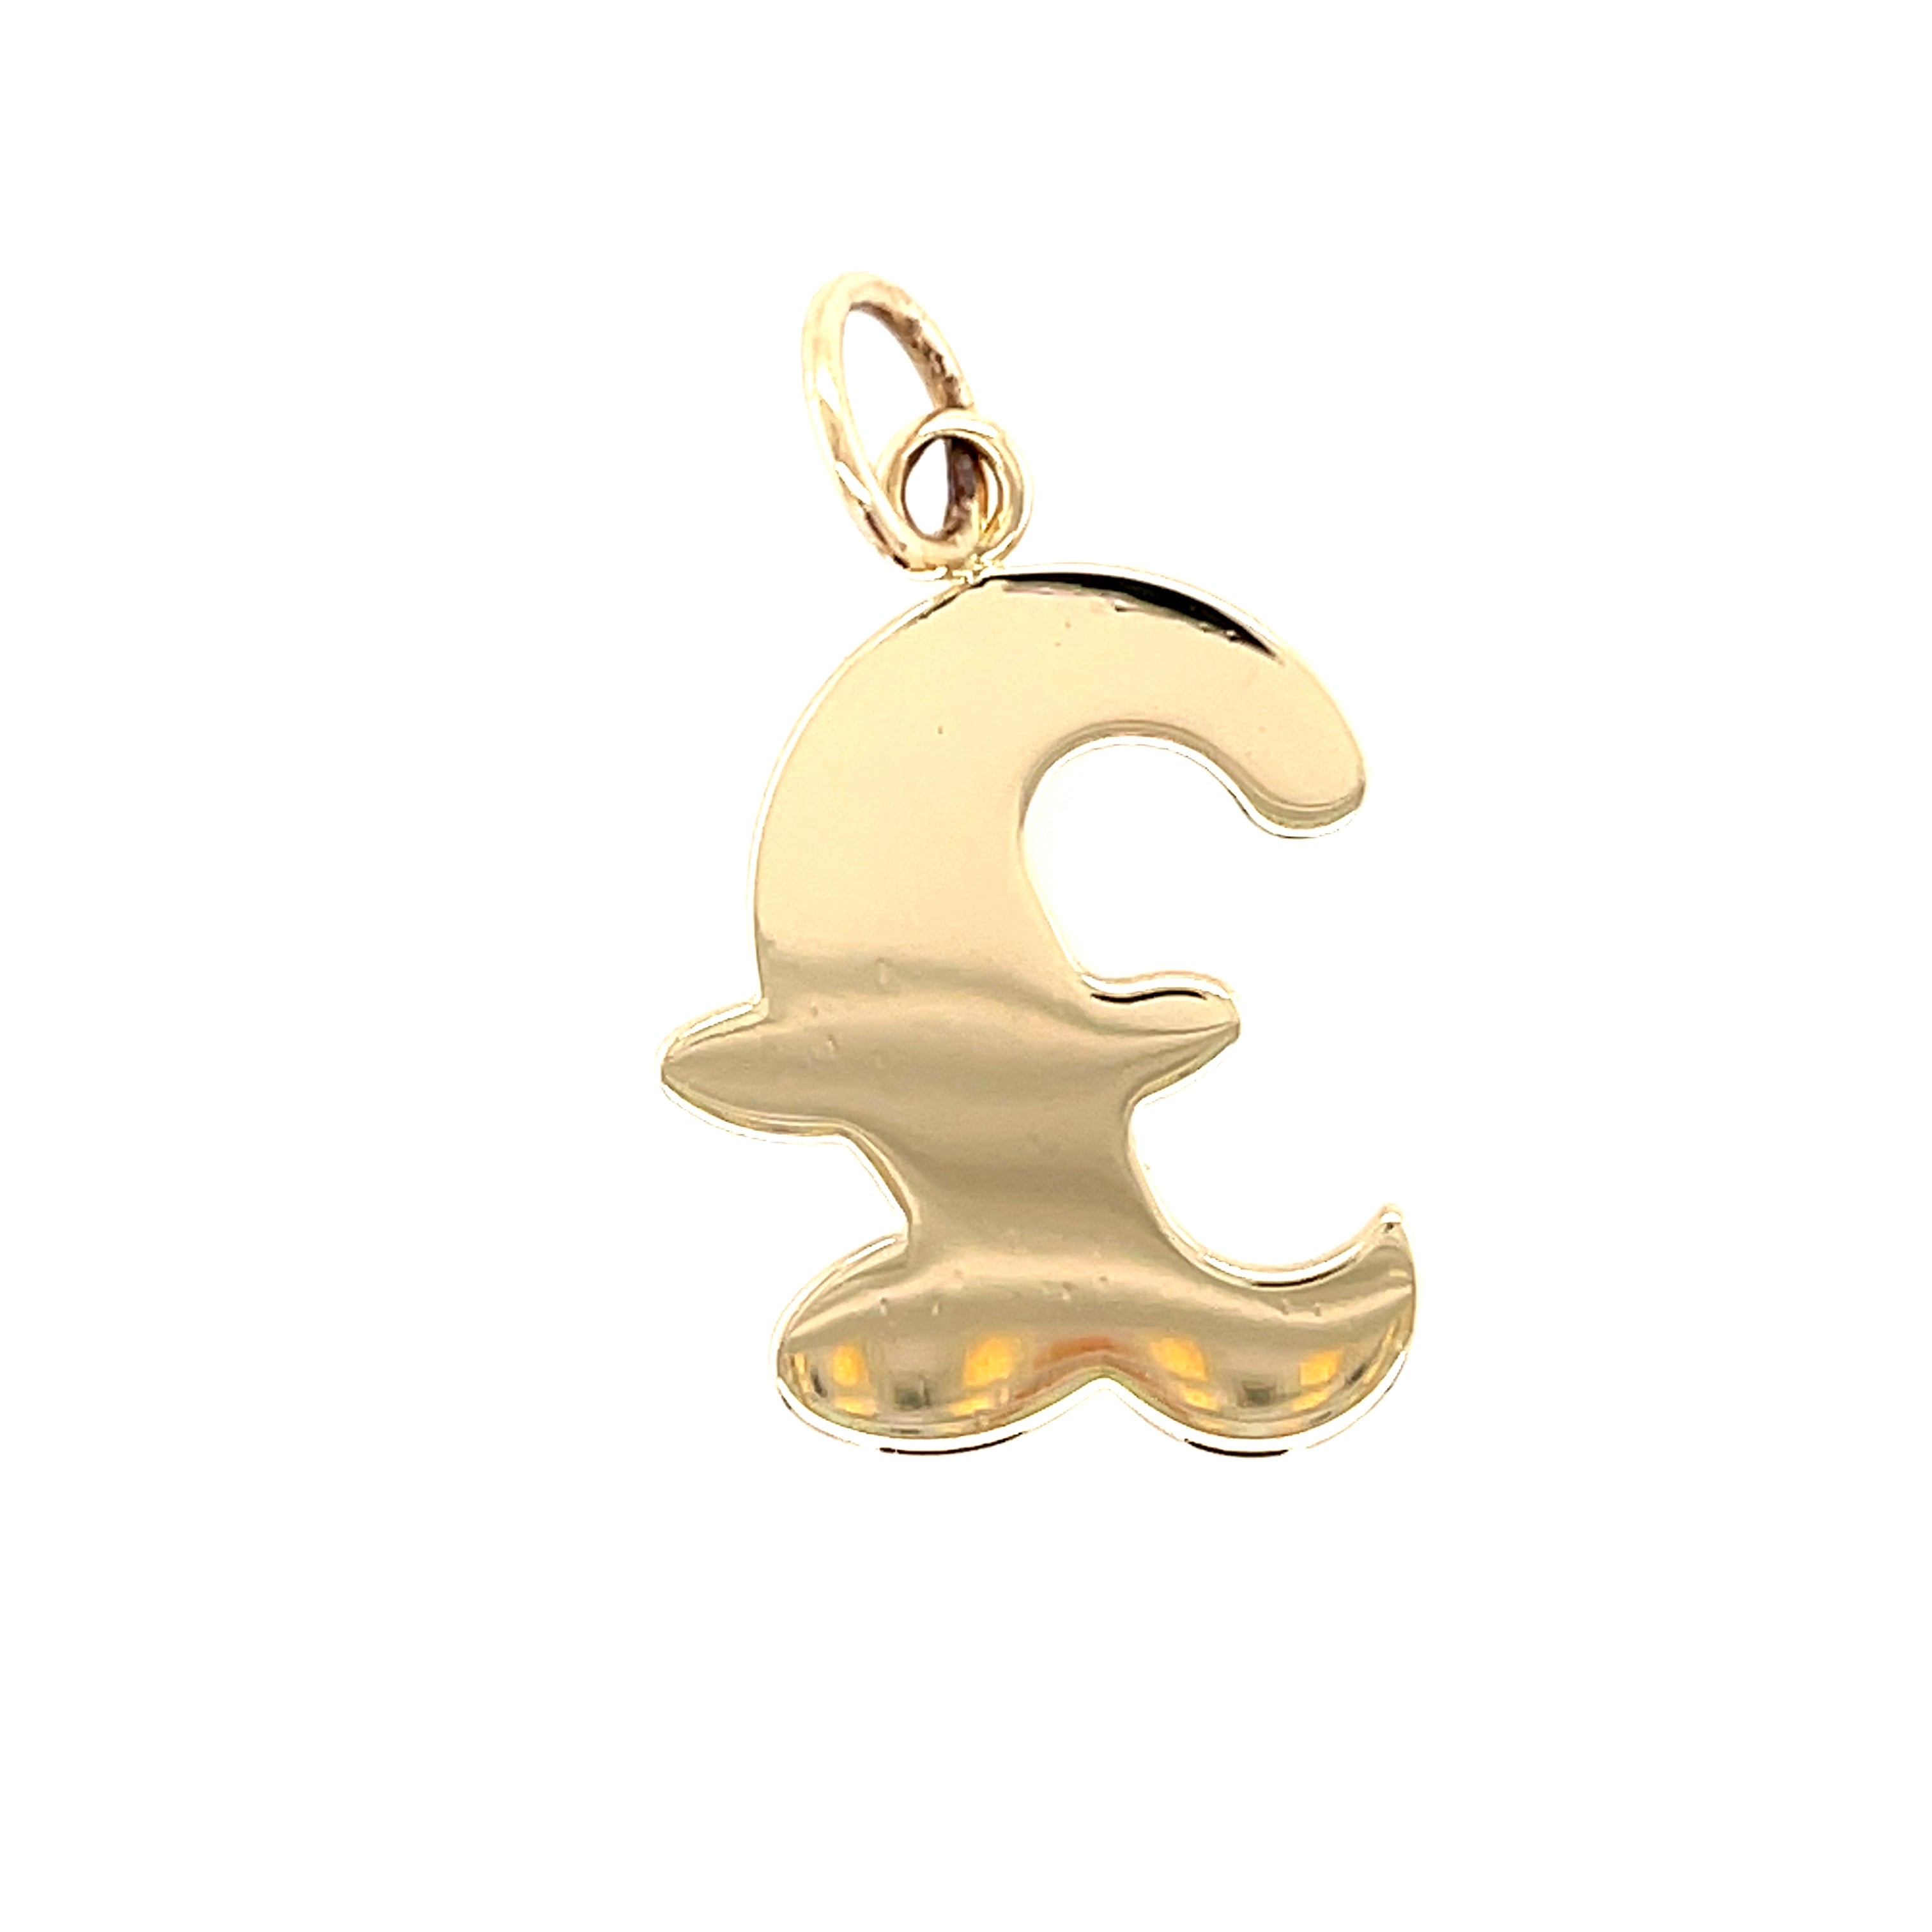 9ct Yellow Gold Novelty Pound Sign Pendant - 4.00g SOLD